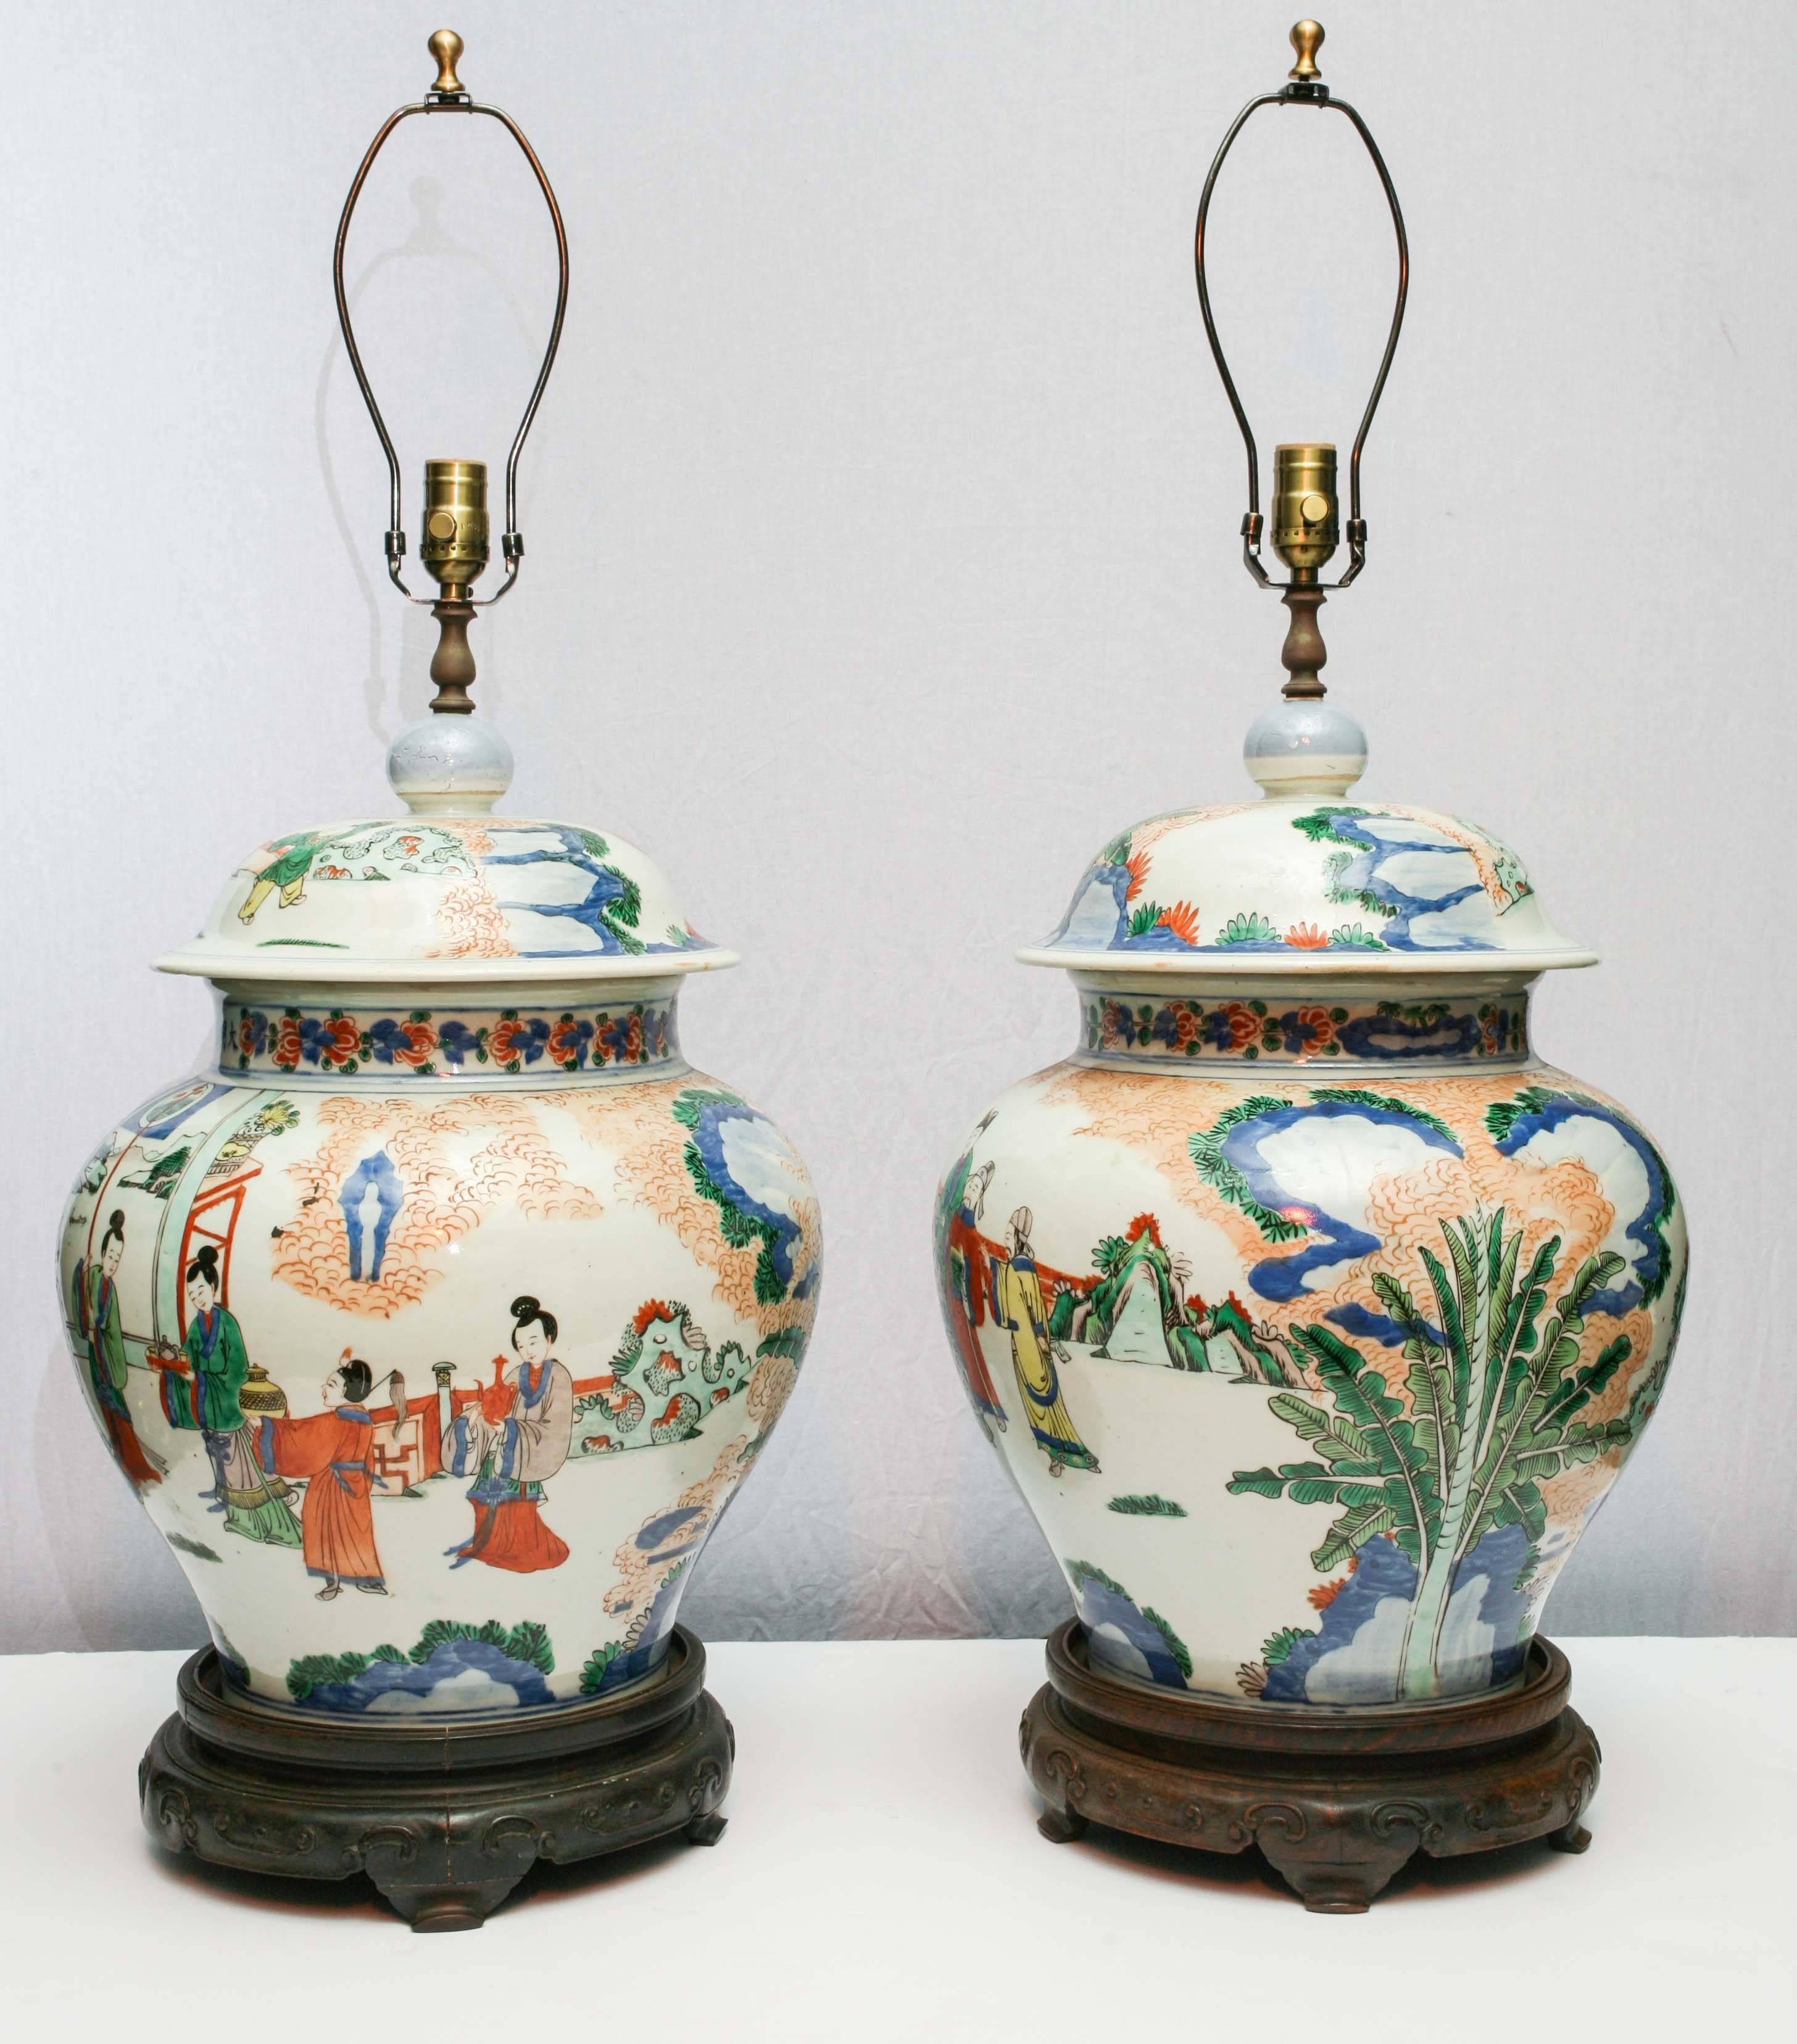 Very fine enameled pair of Chinese covered vases. 
Republic period, 
landscape and figures, banana trees, vegetal inspiration. 
Very pleasant coral orange and blue enamels.
Rescently rewired for USA.